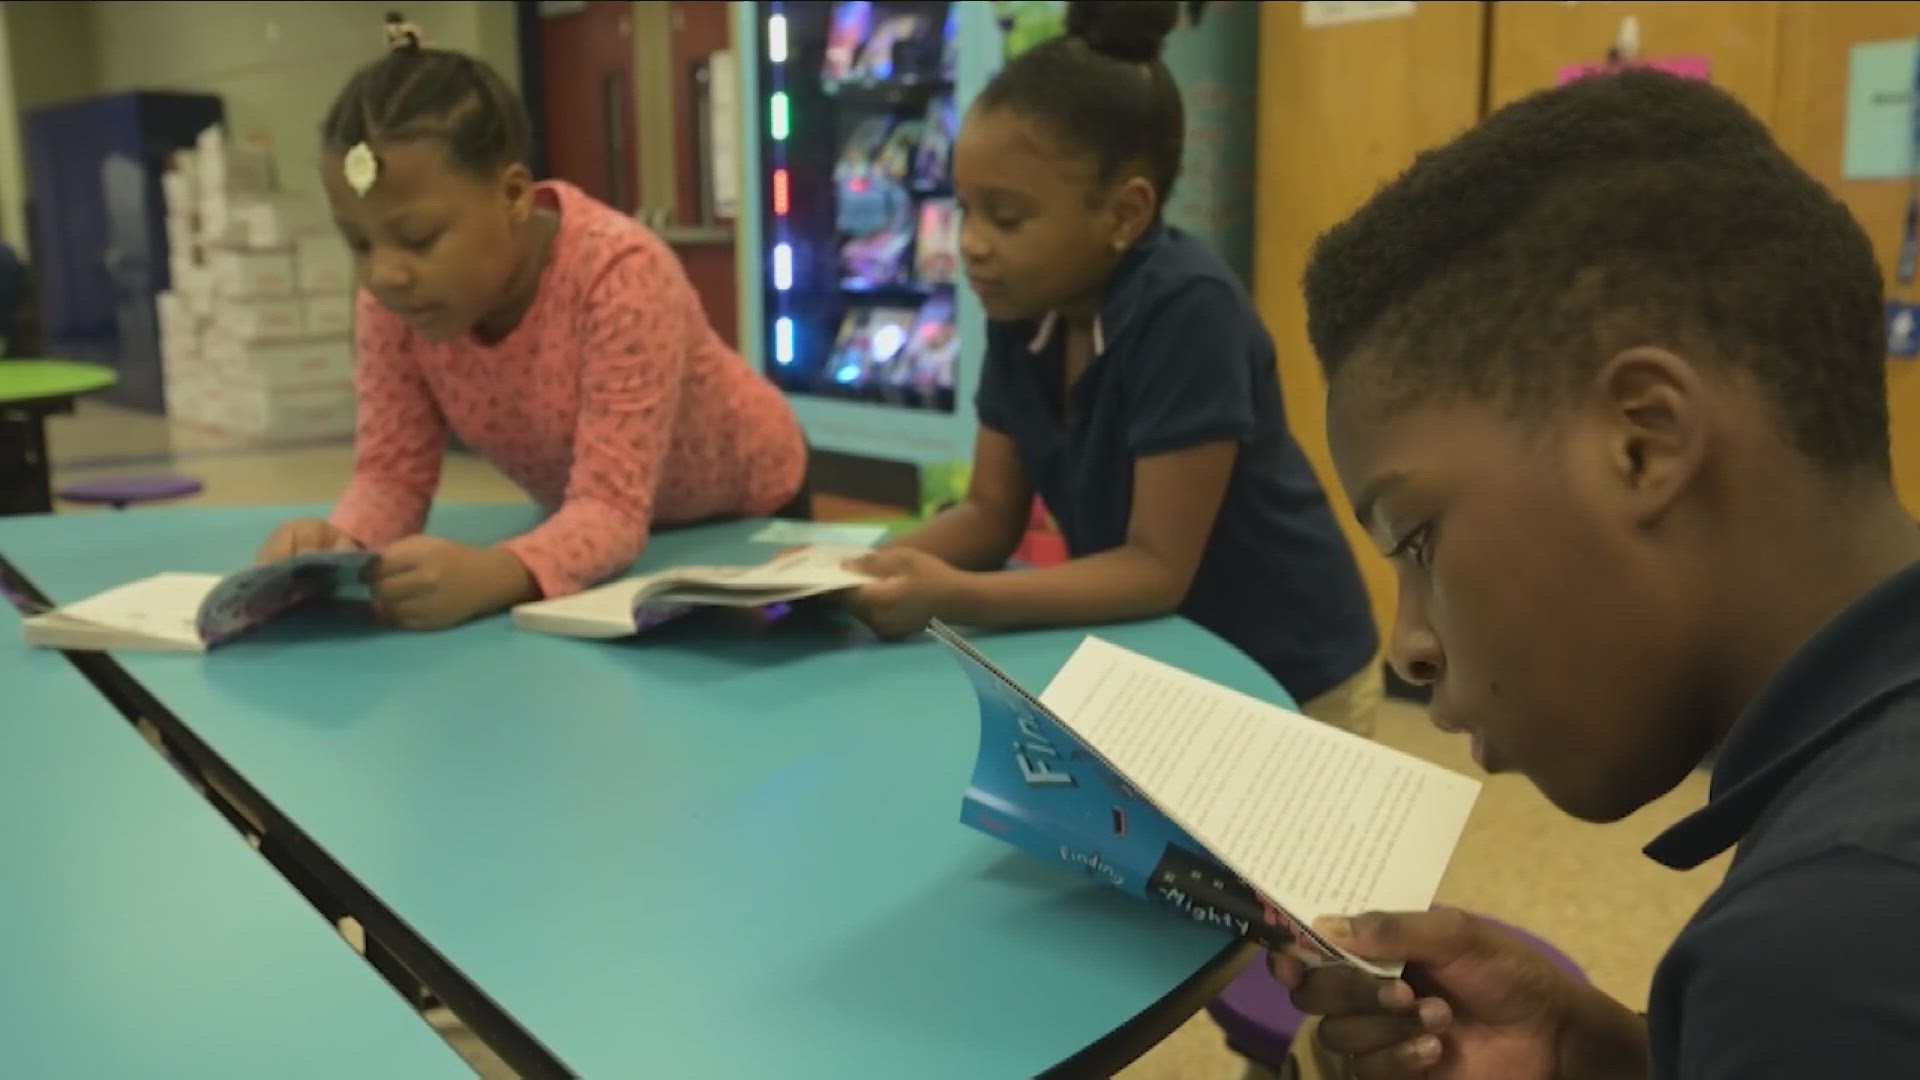 More than 30 states have transitioned toward phonics-based science of reading programs, the governor's office said. New York City has a similar program.